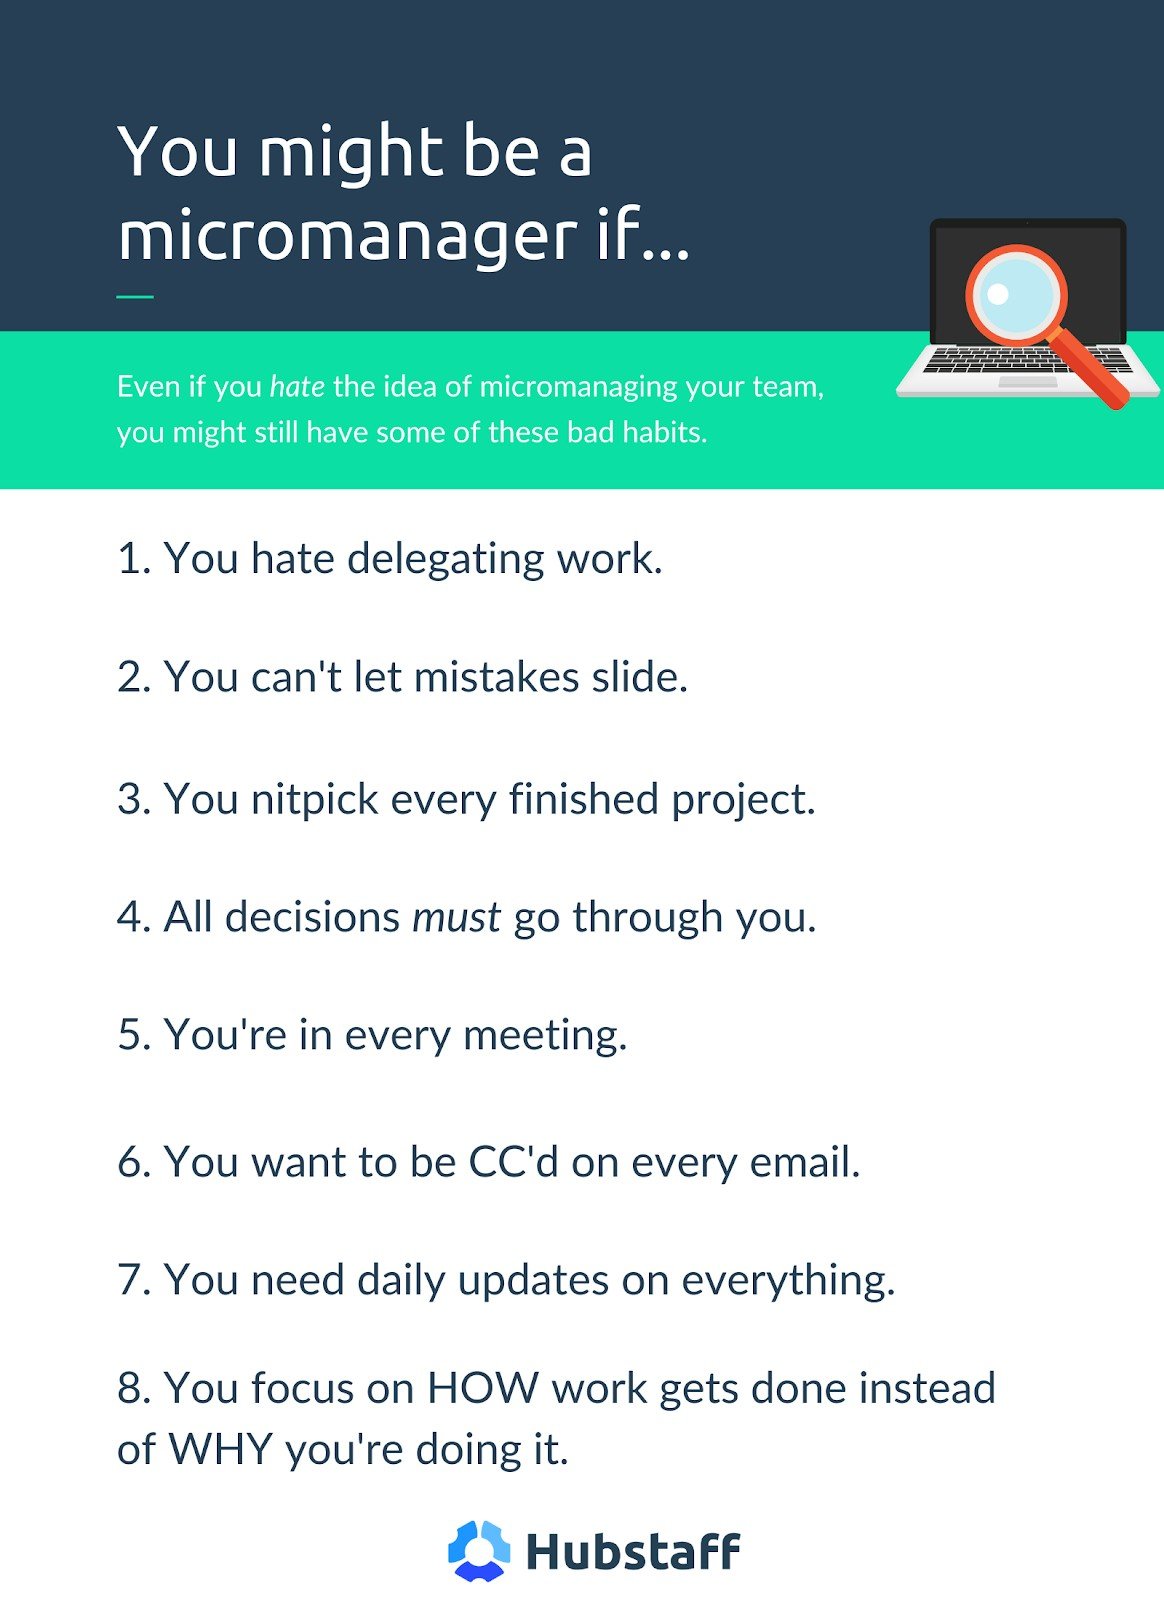 Signs of being a micromanager